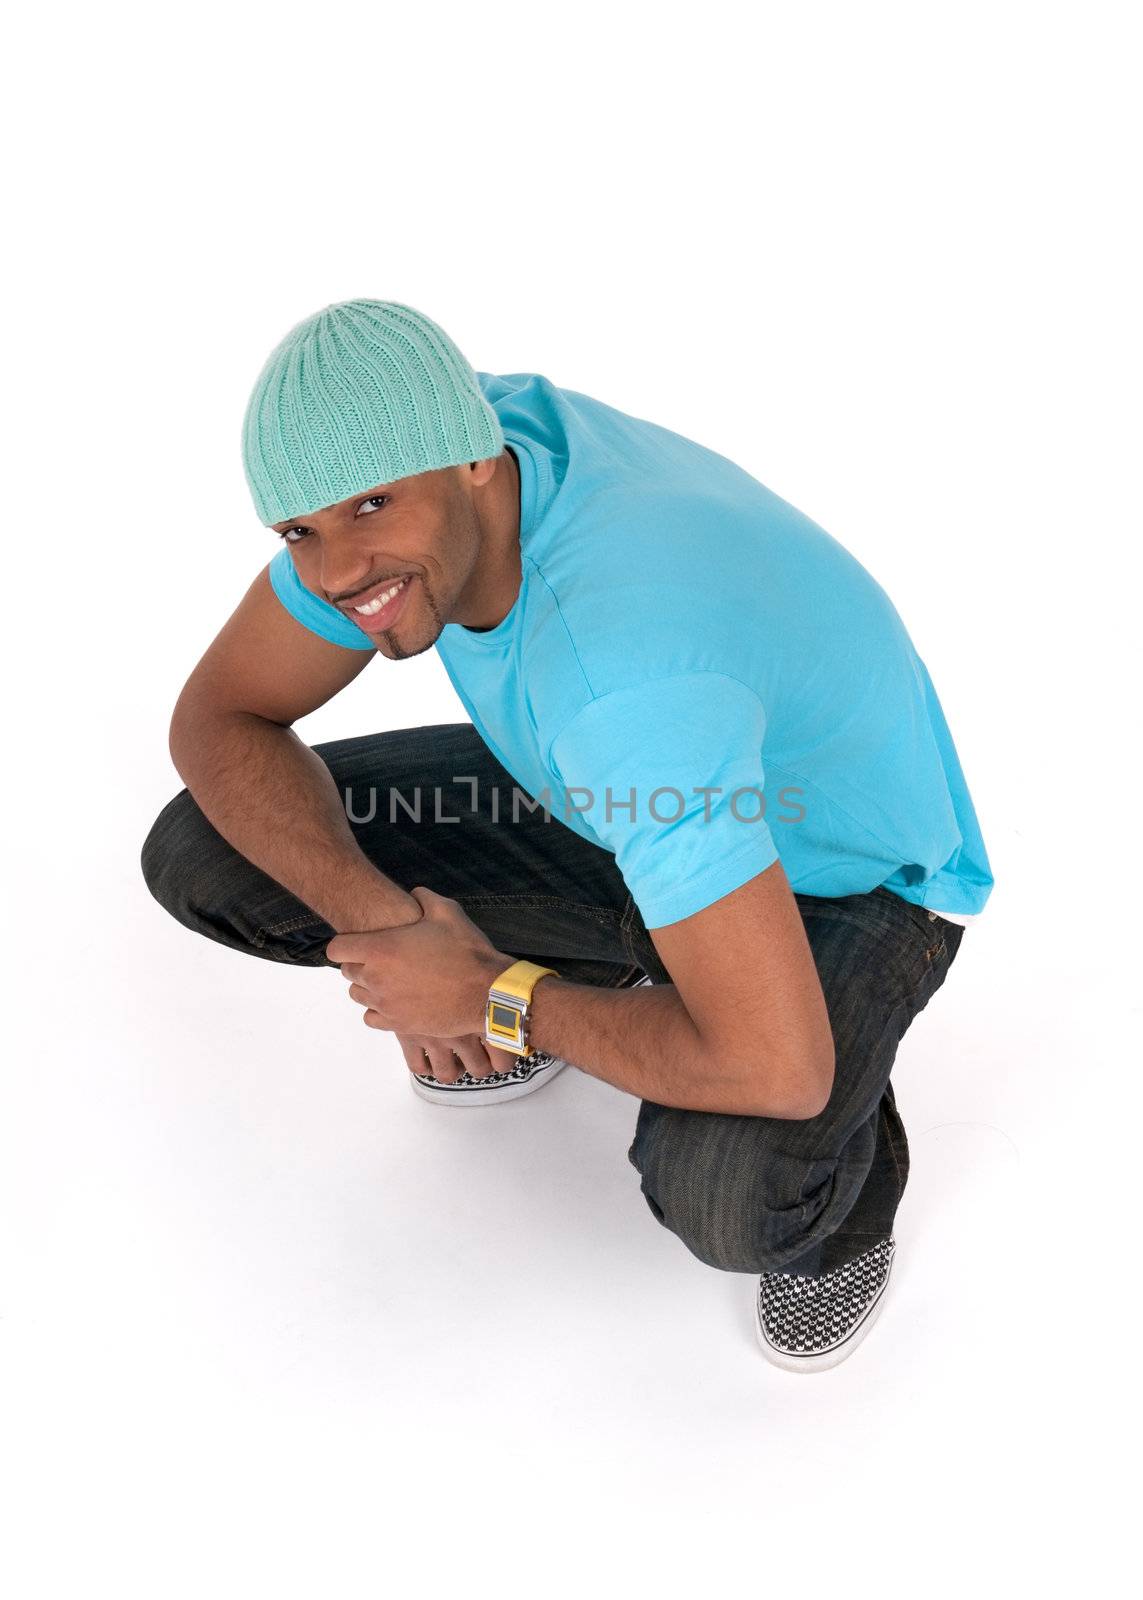 Smiling young man in a blue t-shirt squatting. Isolated on white background.